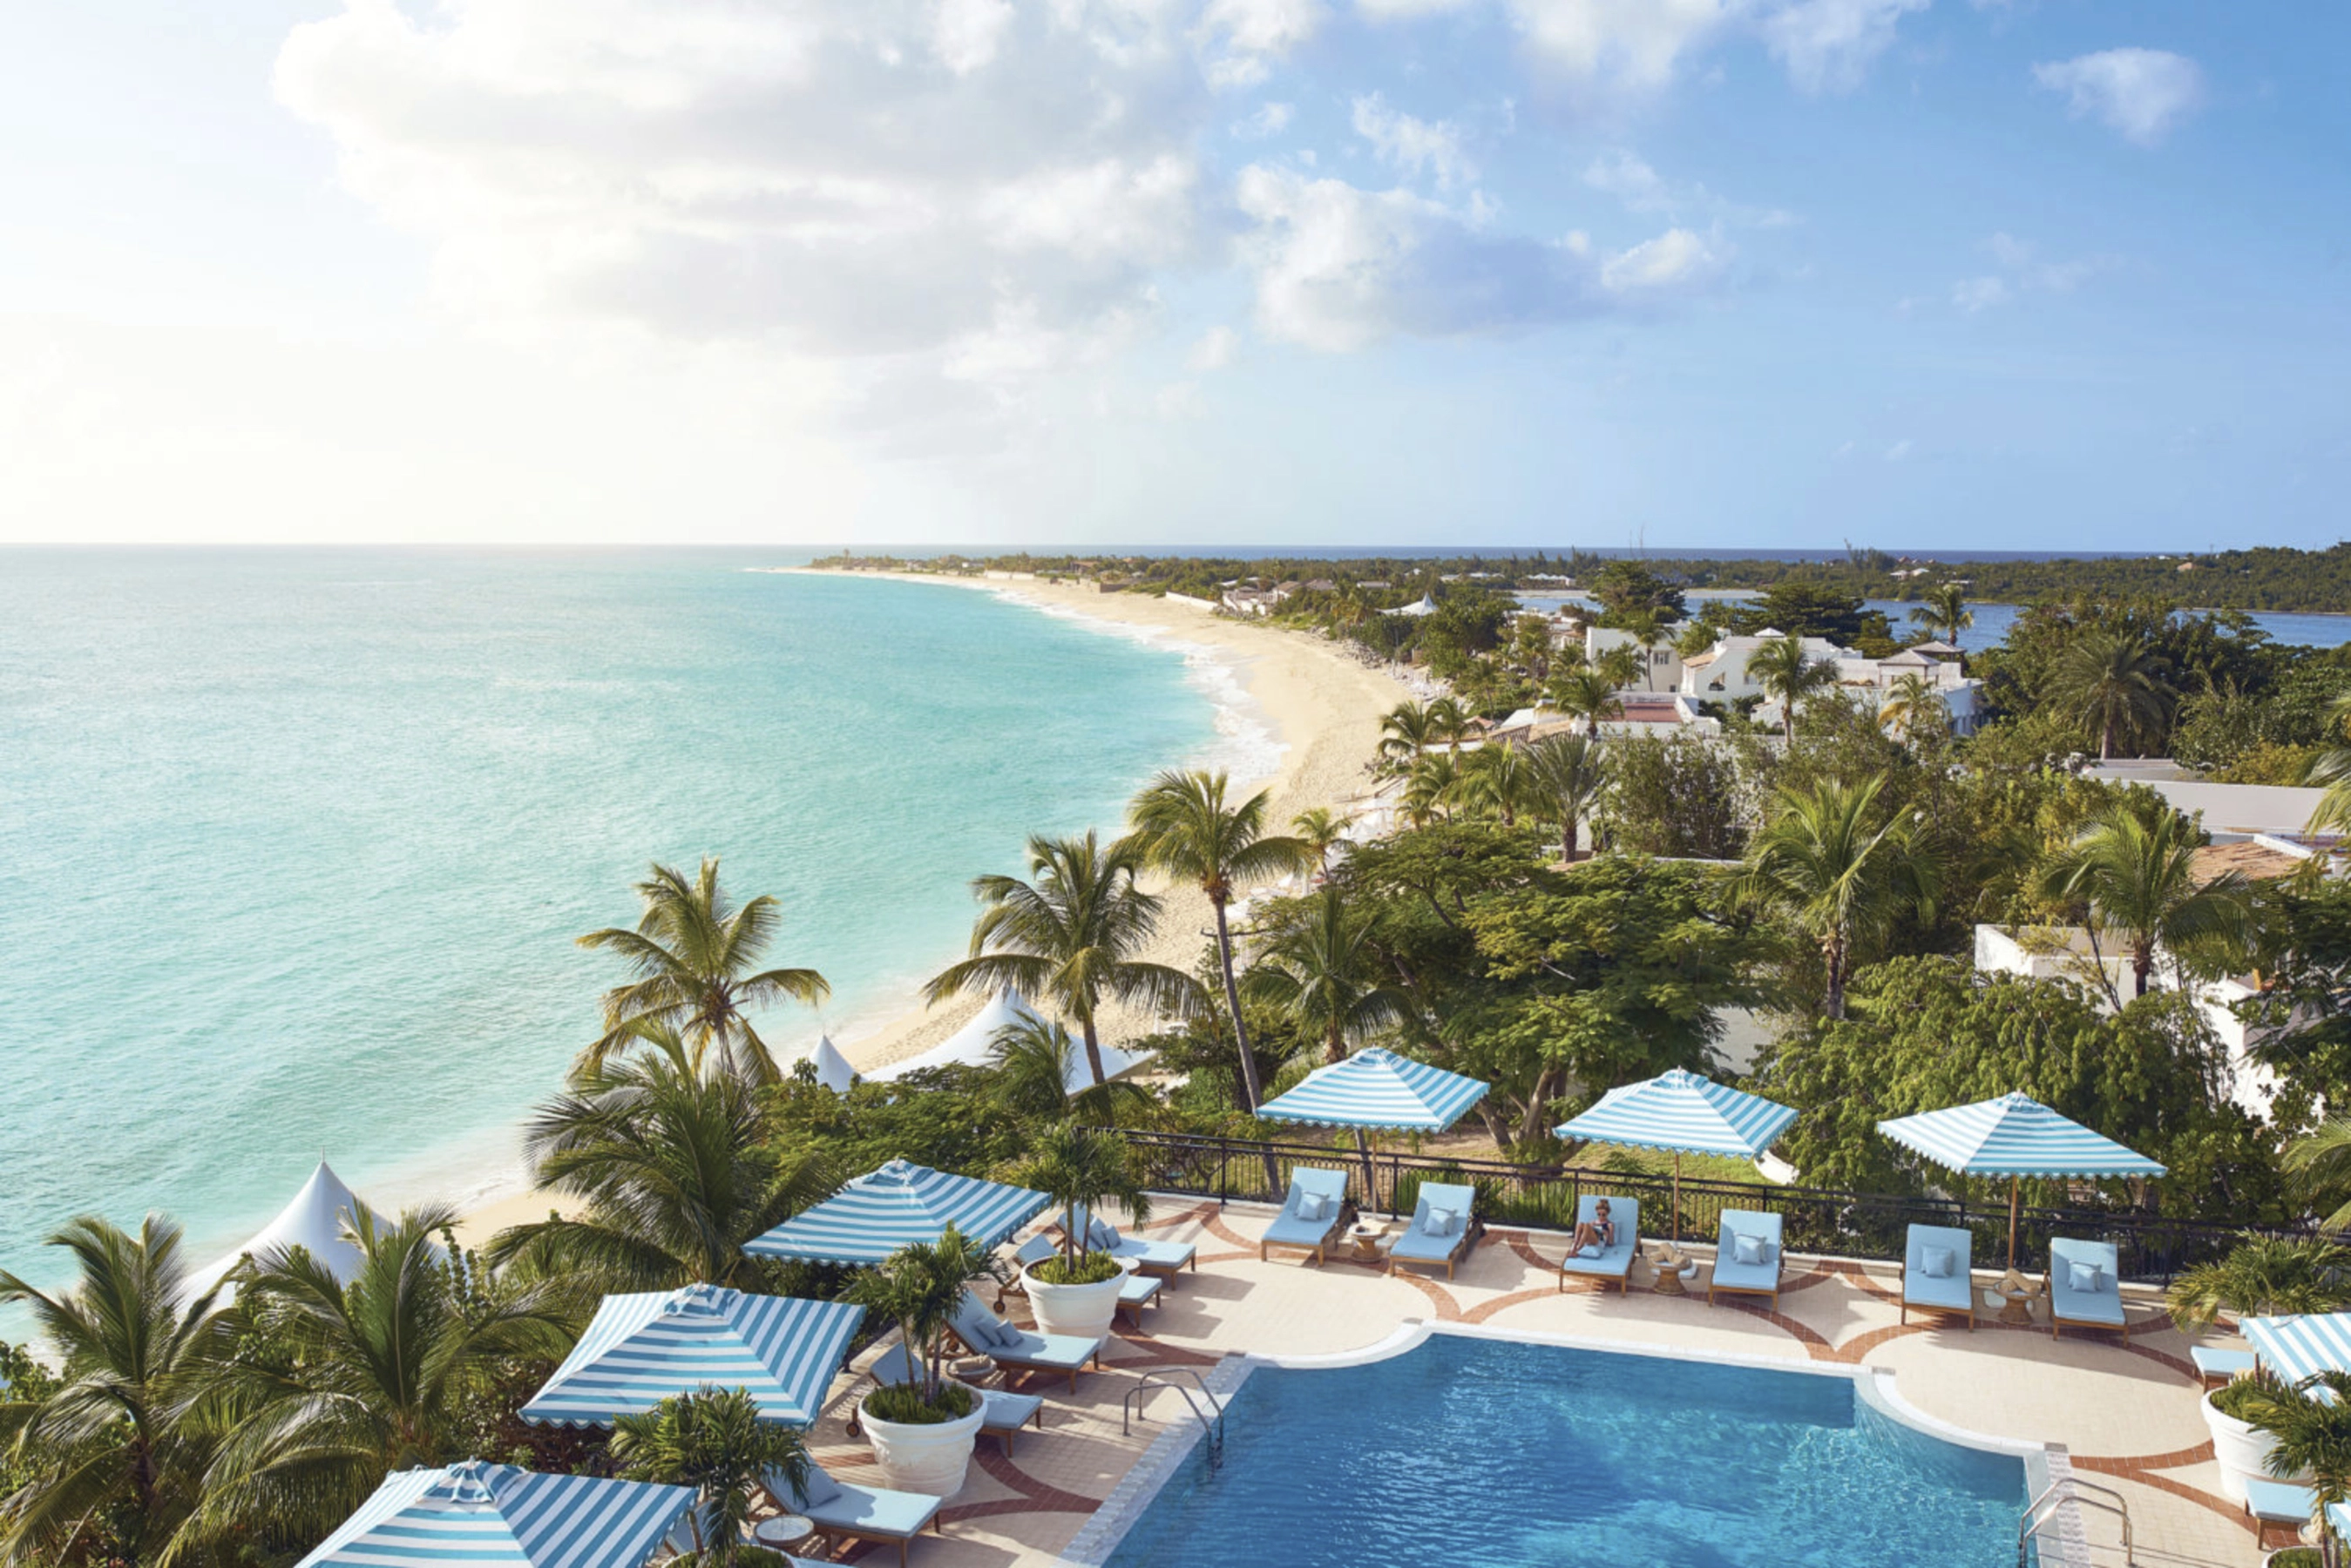 ></center></p><p>Prolong your stay individually on the island of St Maarten at the exclusive Hotel Belmond La Samanna.</p><p>The 